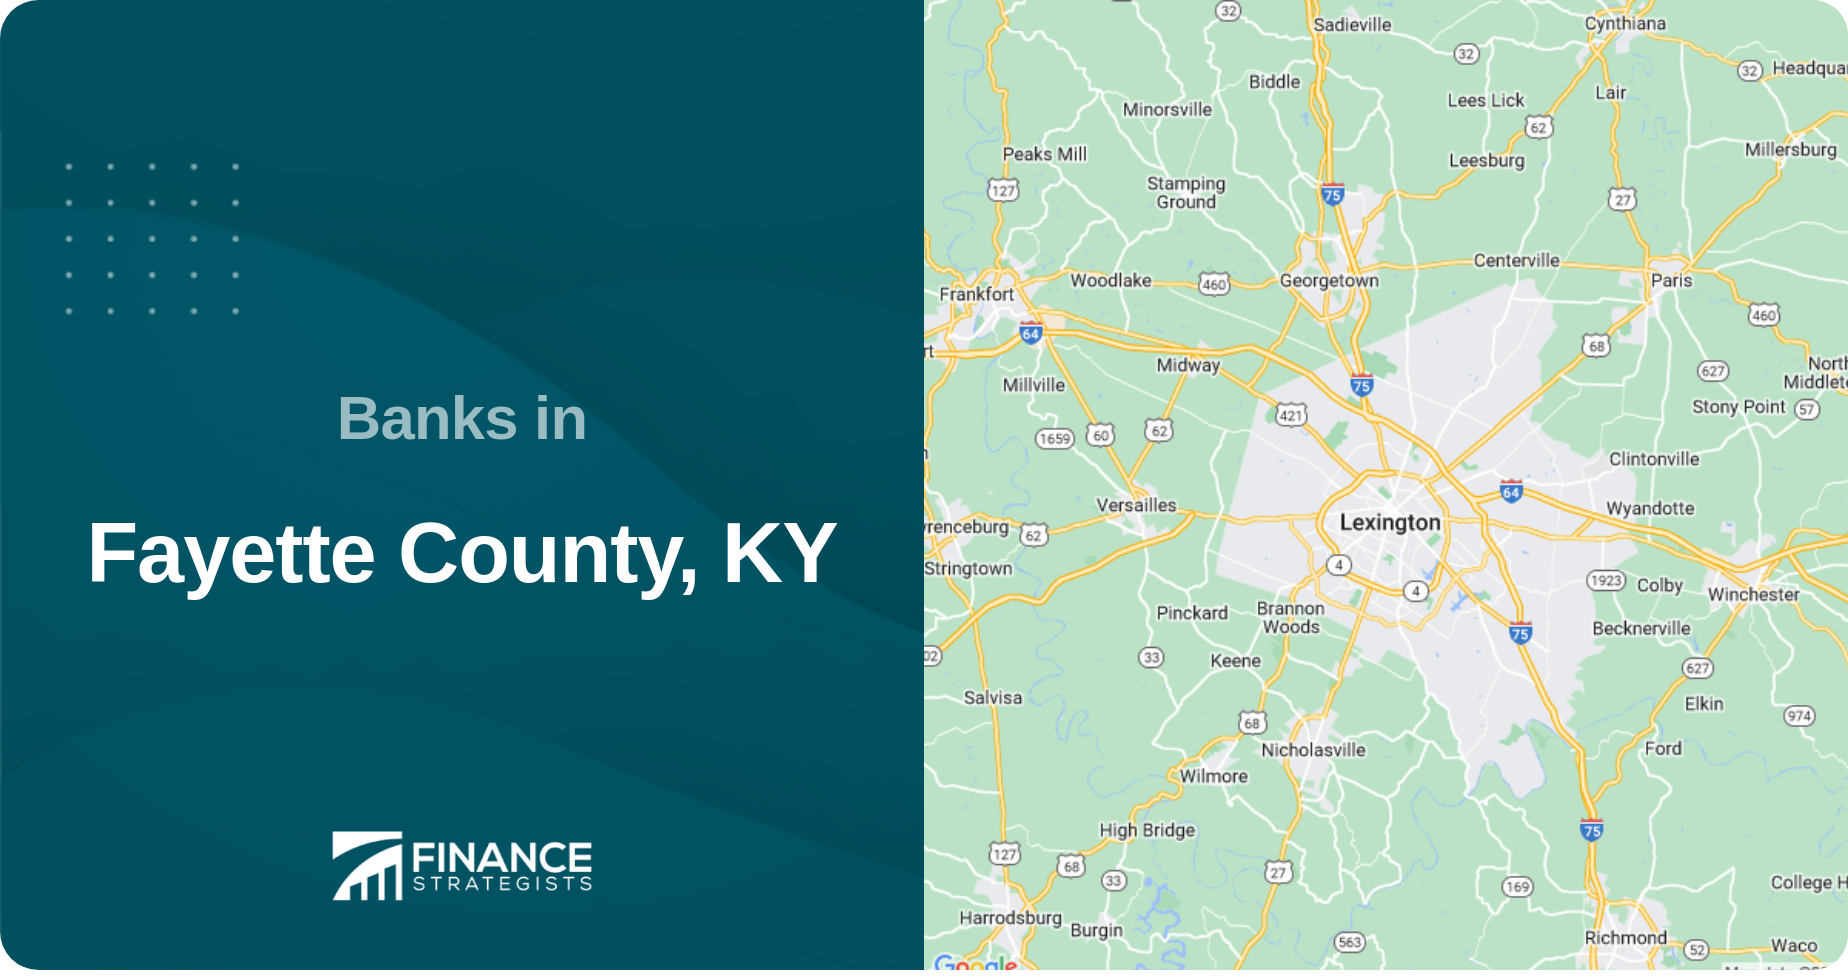 Banks in Fayette County, KY